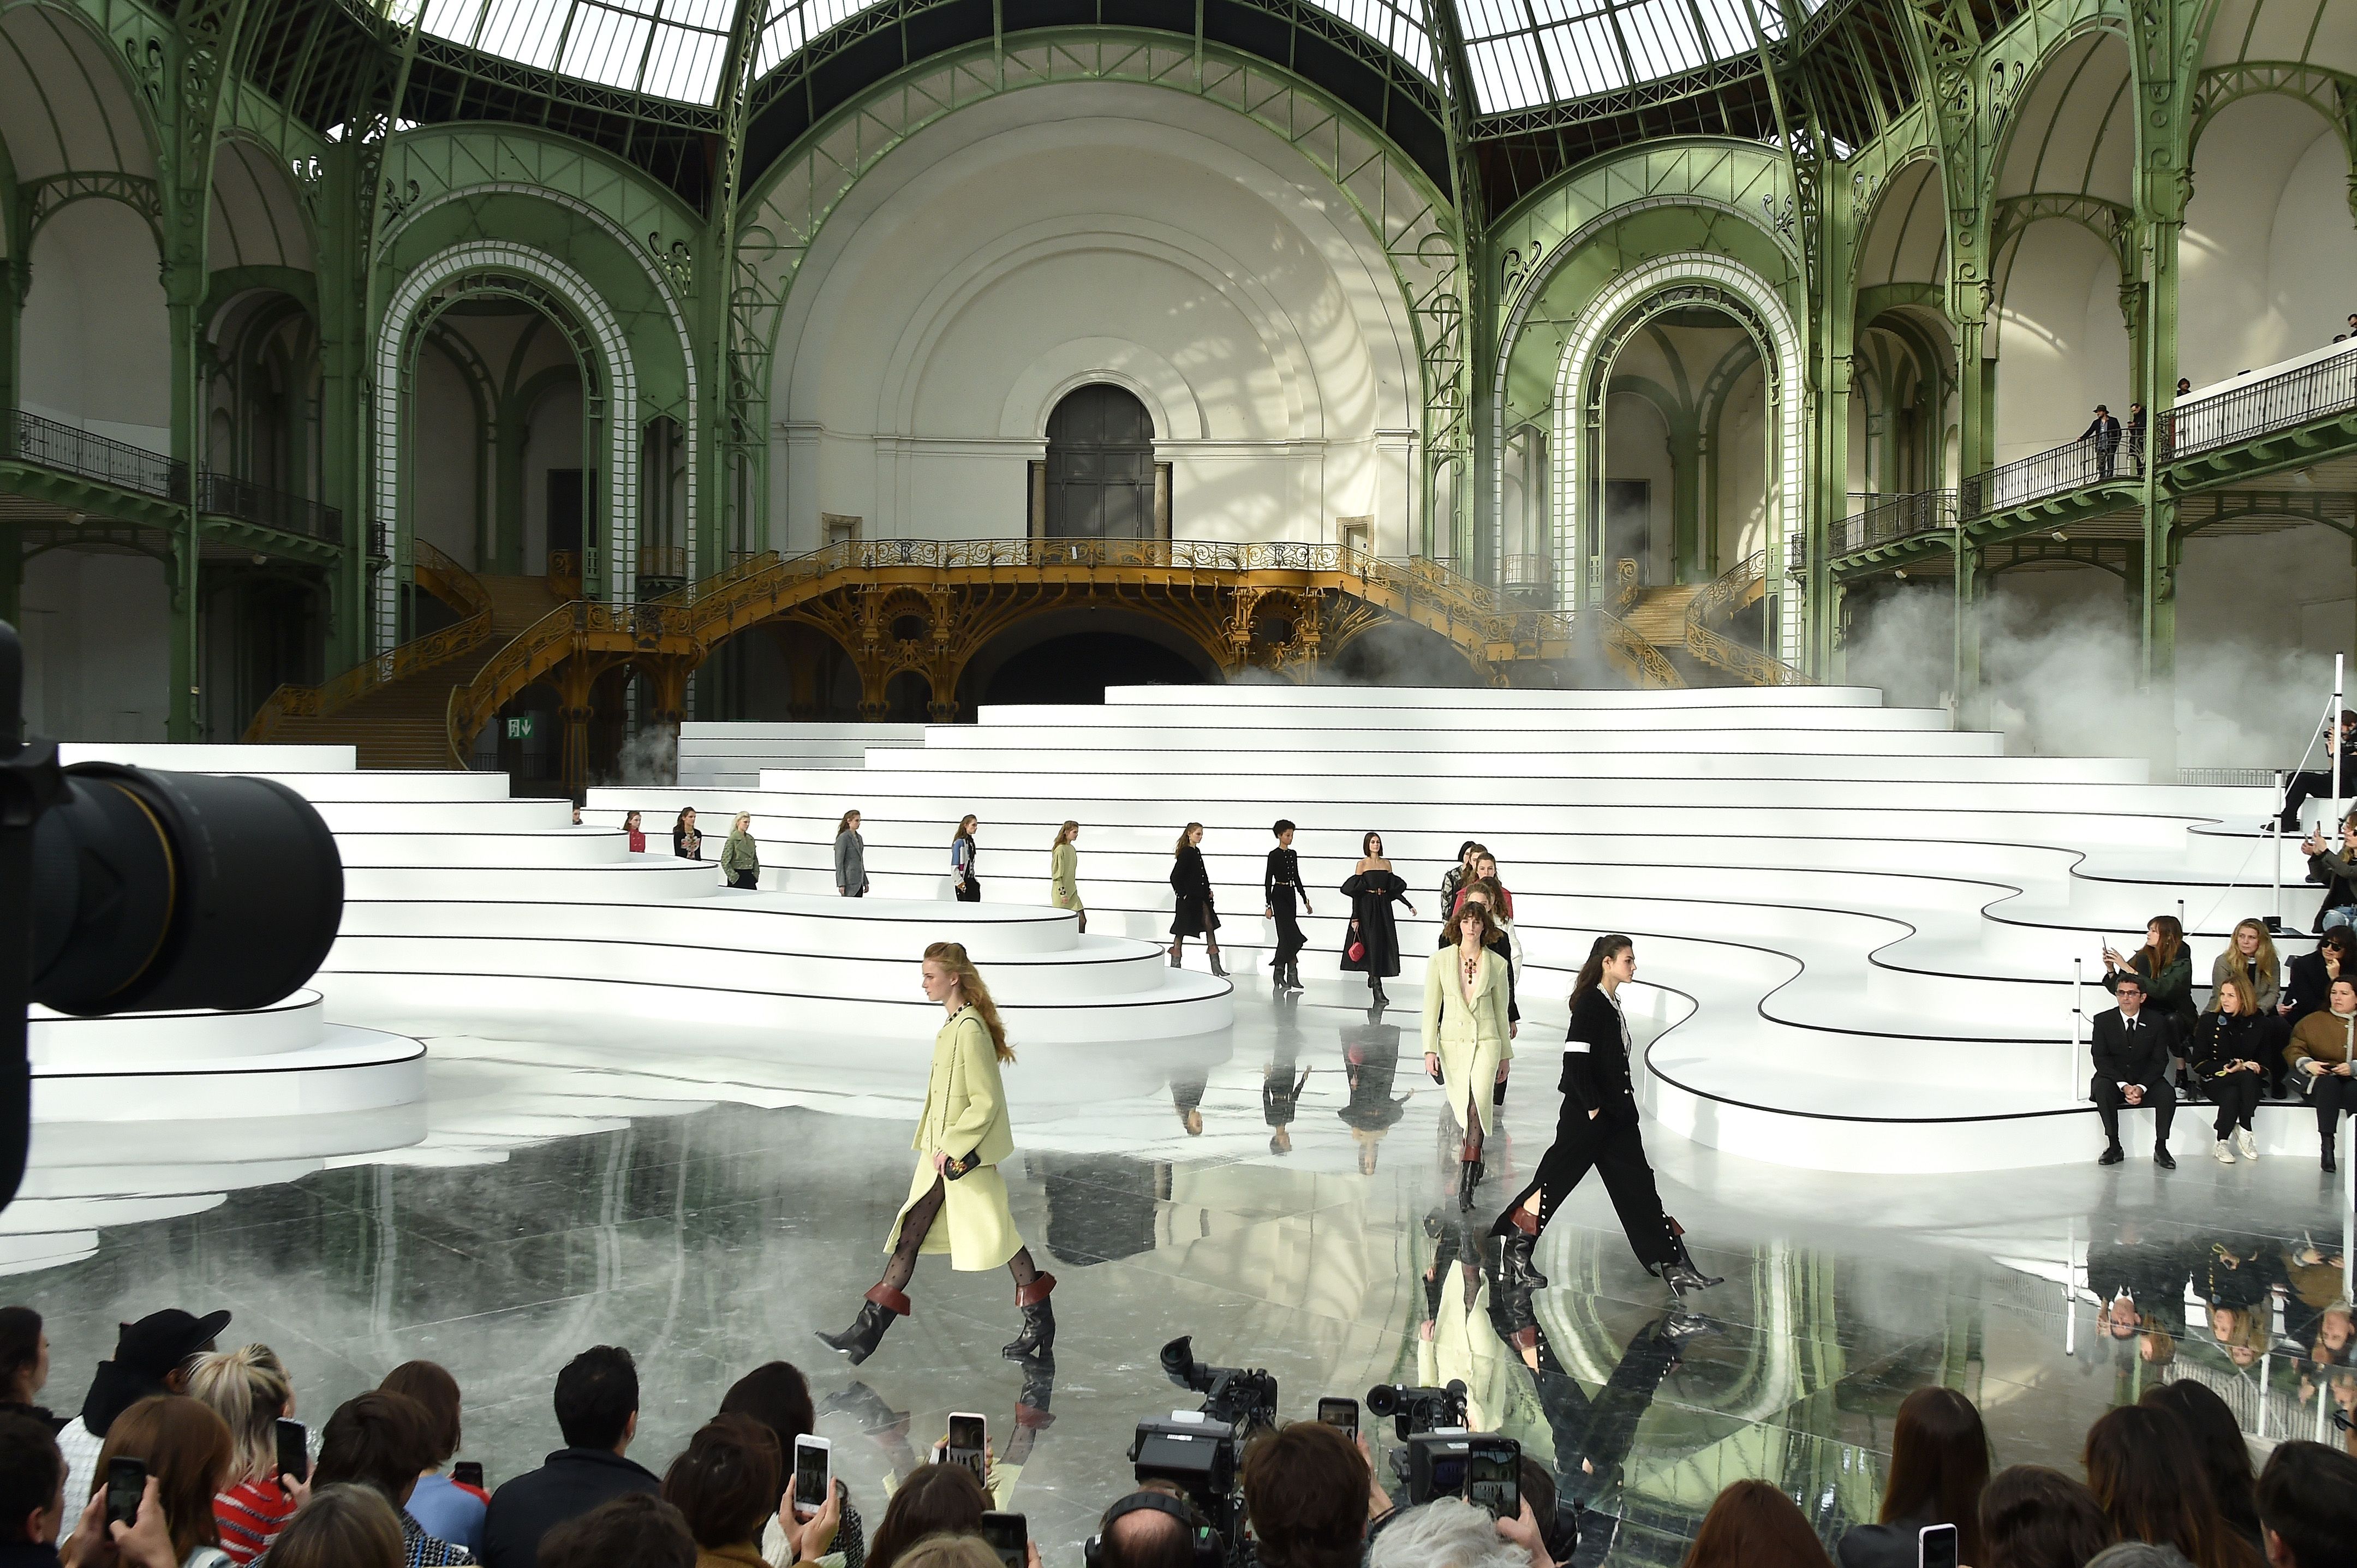 Chanel streams fashion show from the hall of a 16th century Loire Valley  chateau amid Covid-19